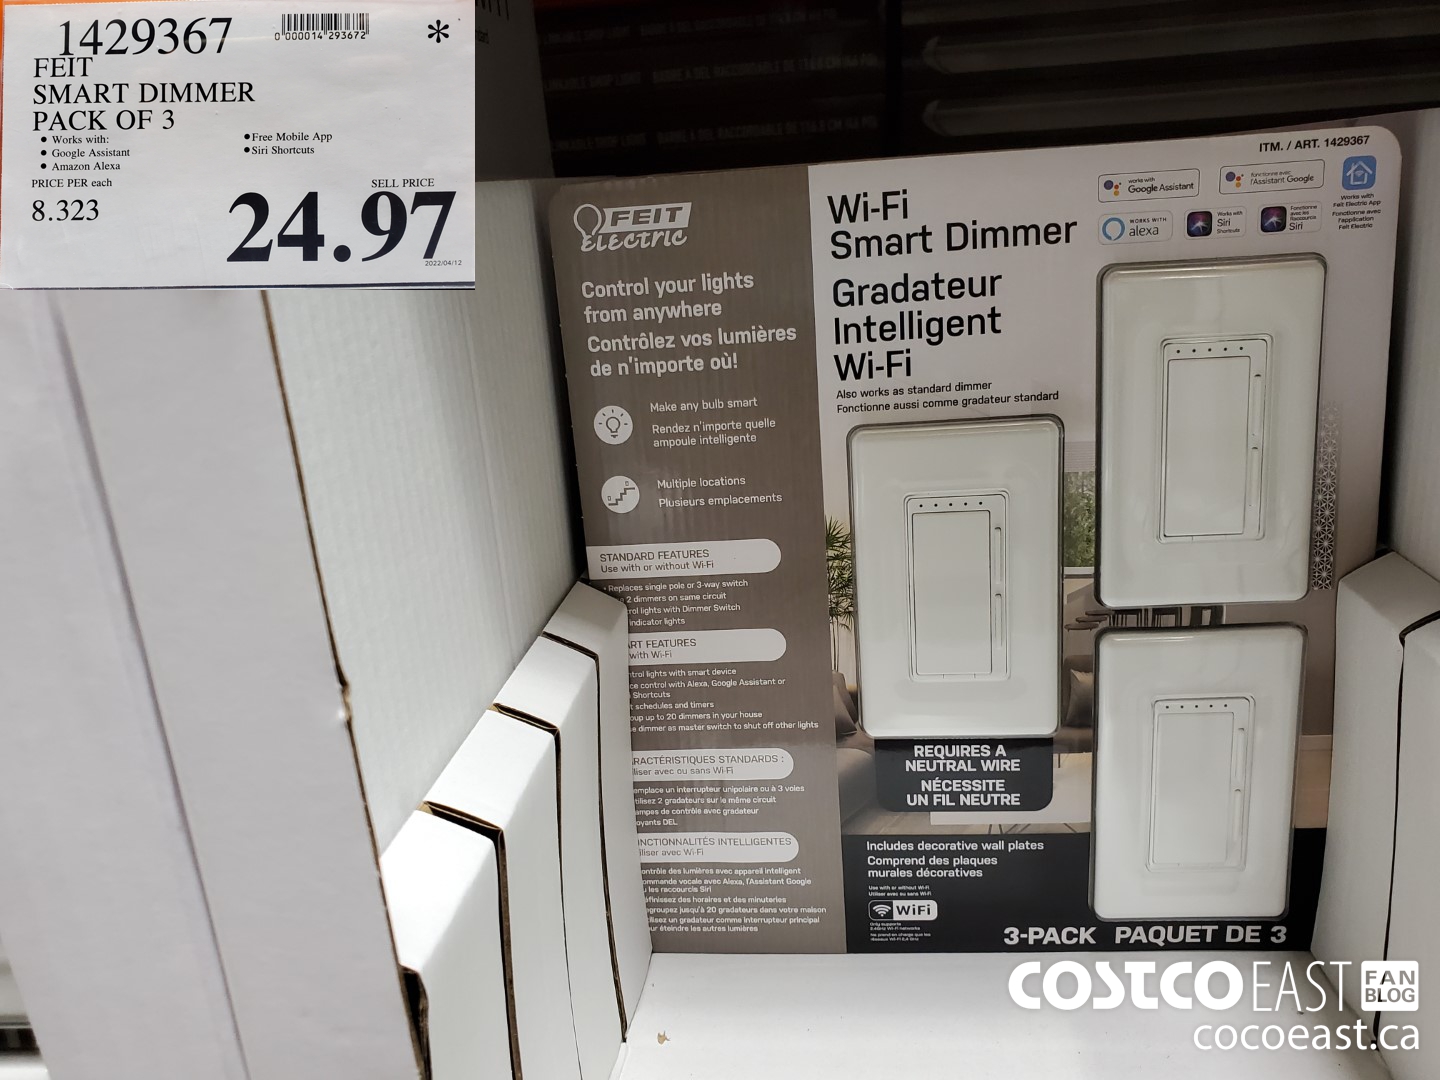 Costco] Feit 3-pack WiFi Dimmer Switch $32.99 instore - RedFlagDeals.com  Forums